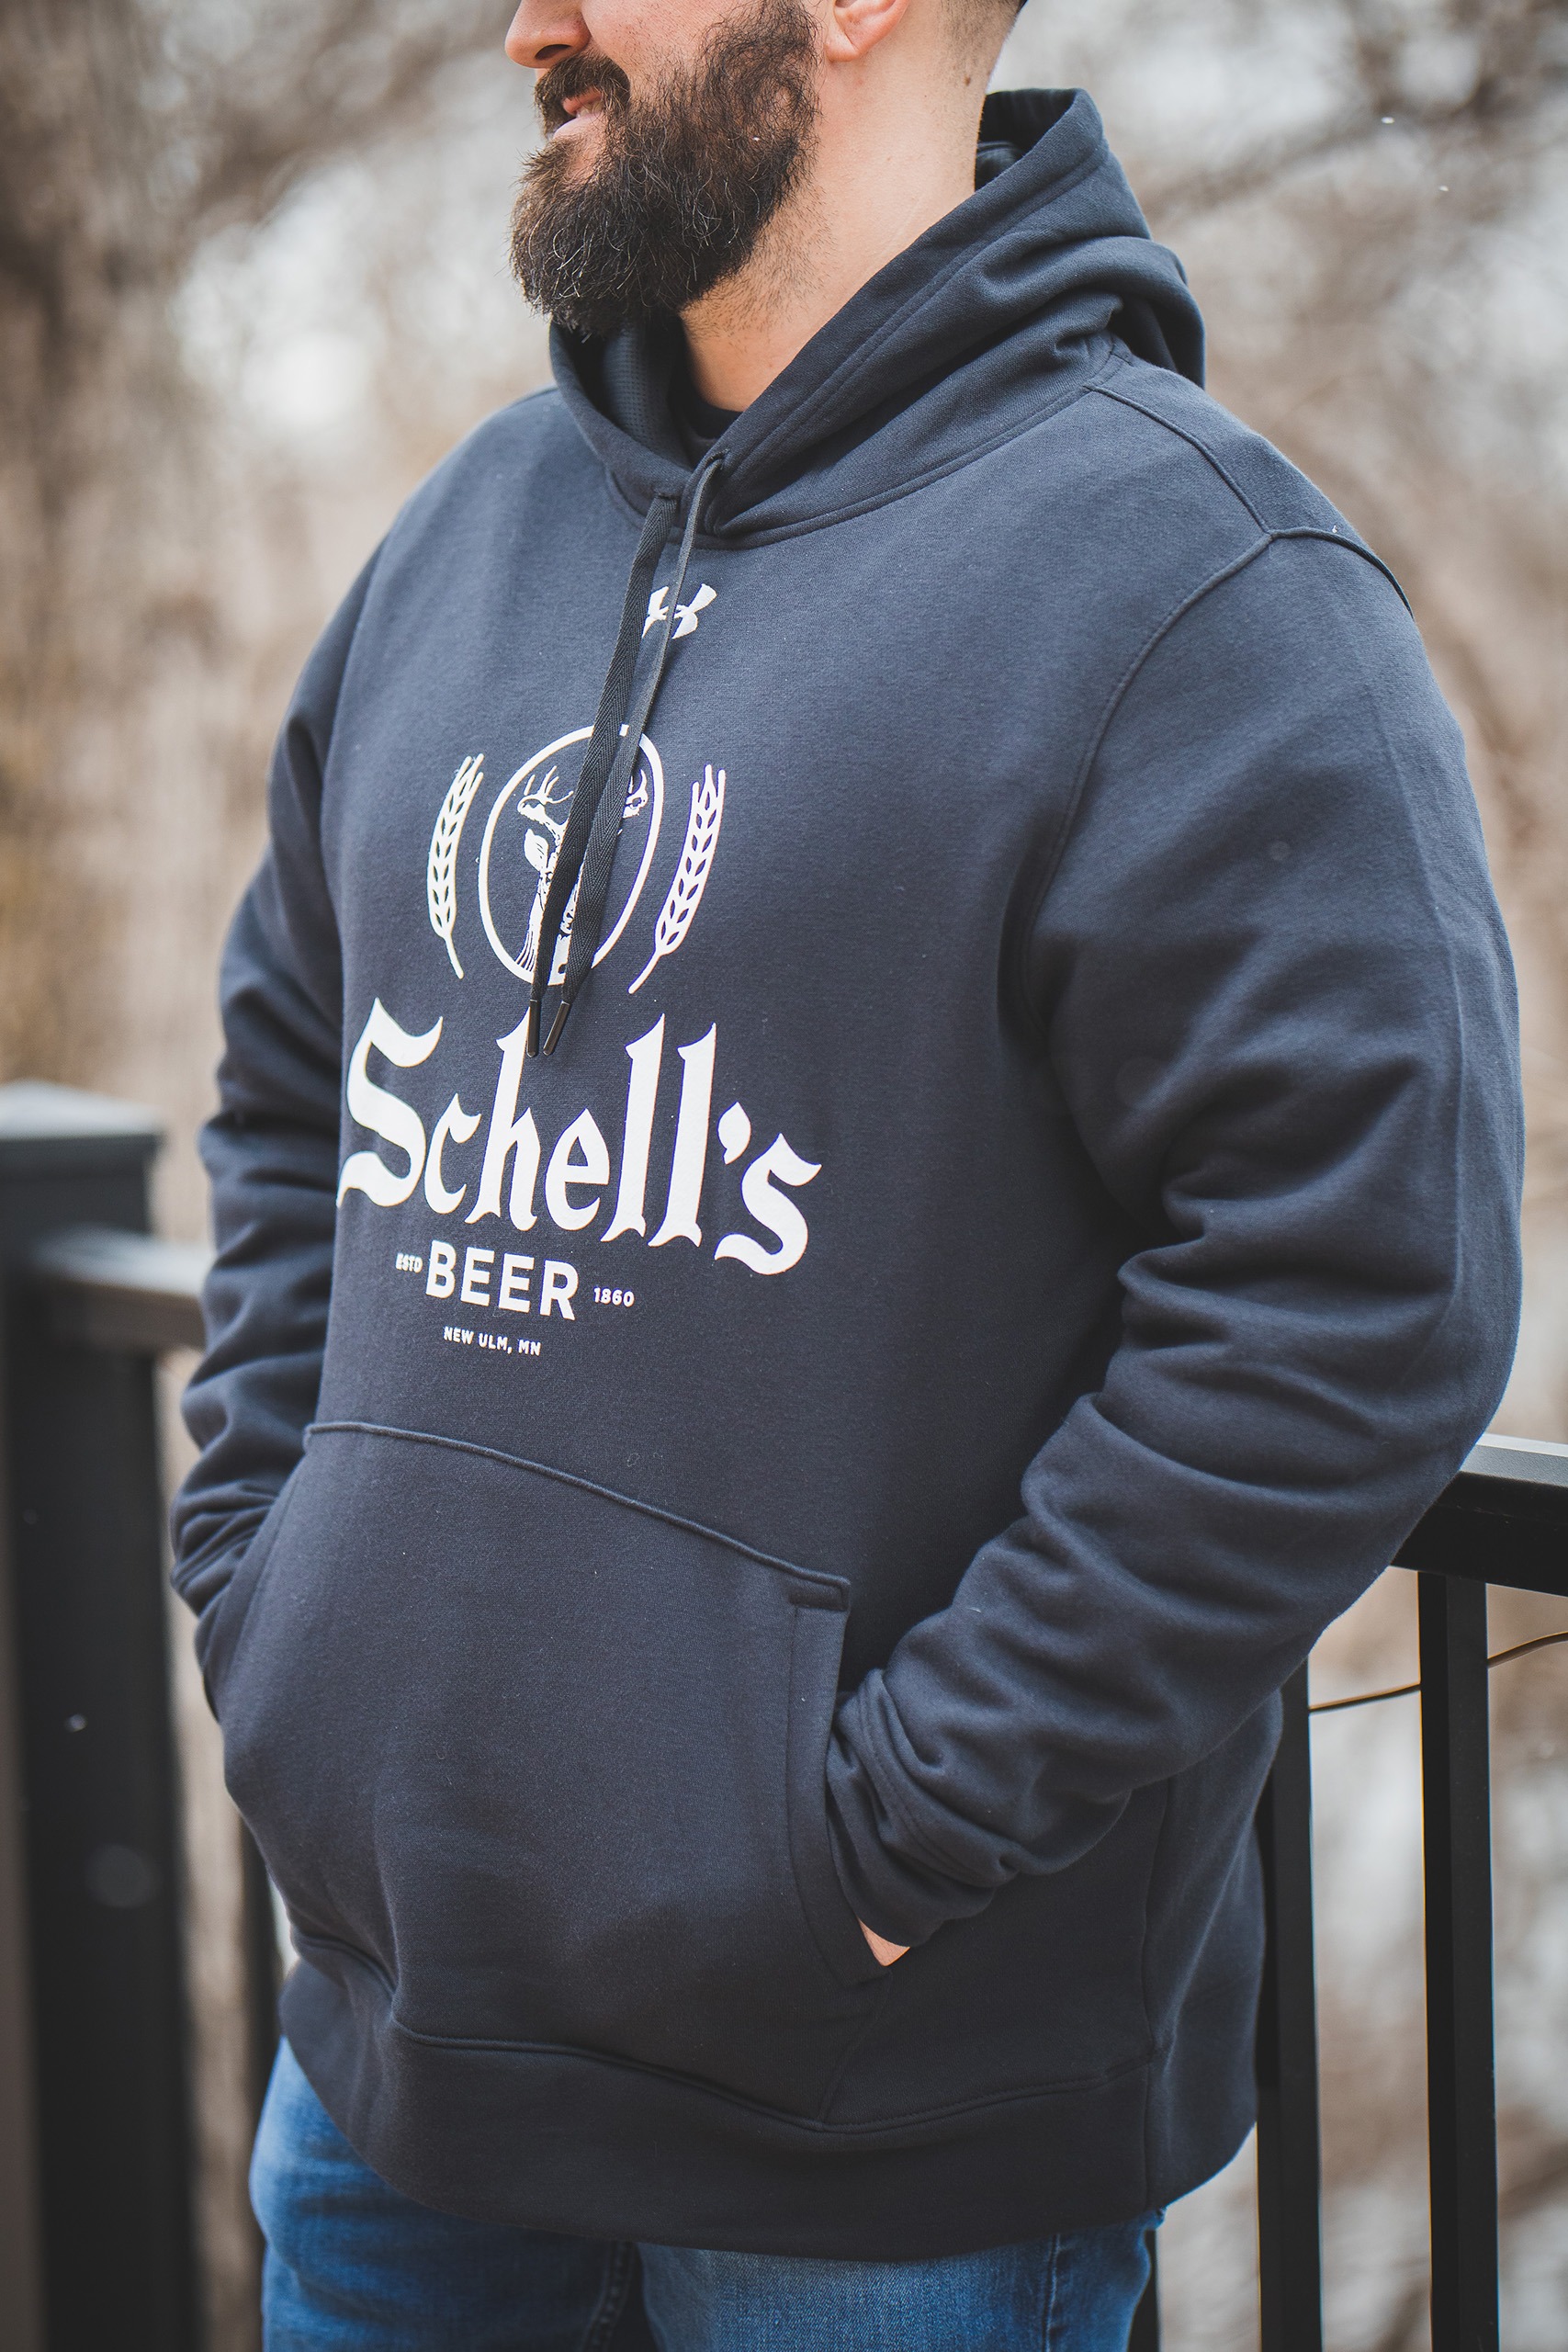 Hockey style - Beverly Fire - Old Style Lace Up Hoodie